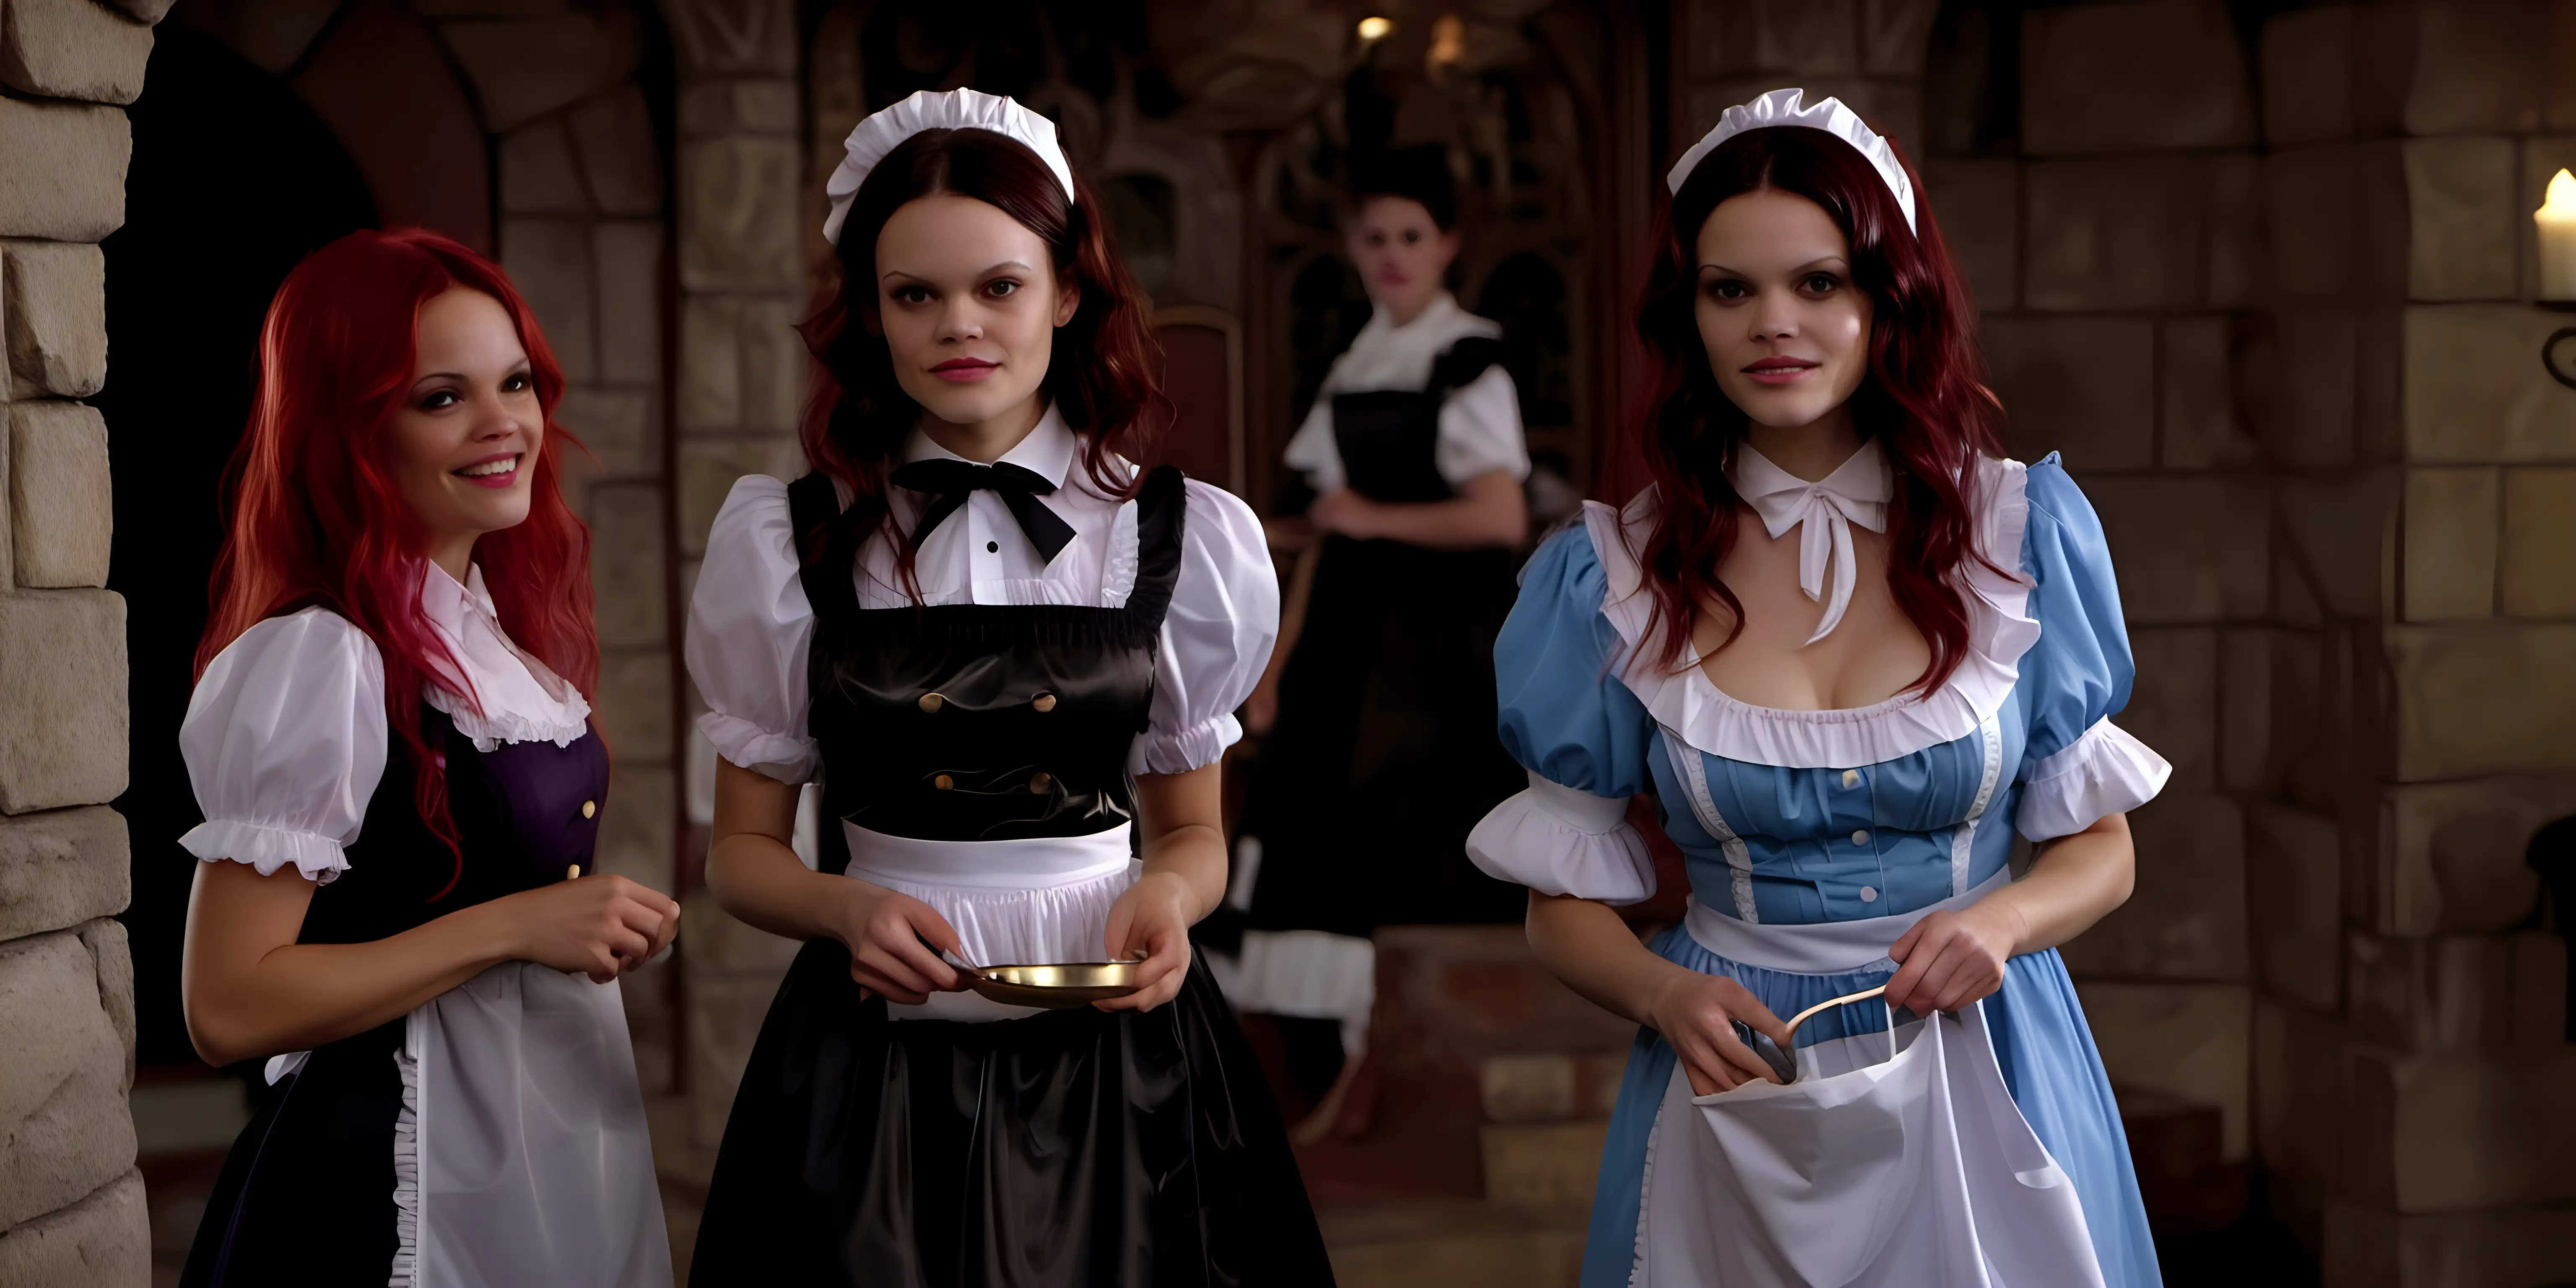 girls in long crystal silk retro strong style sky BLUE and lila
french and victorian maid gown with apron and peter pan colar and long and short sleeves costume and milf mothers long blonde and red hair,black hair Rachel Bilson  smile in castle